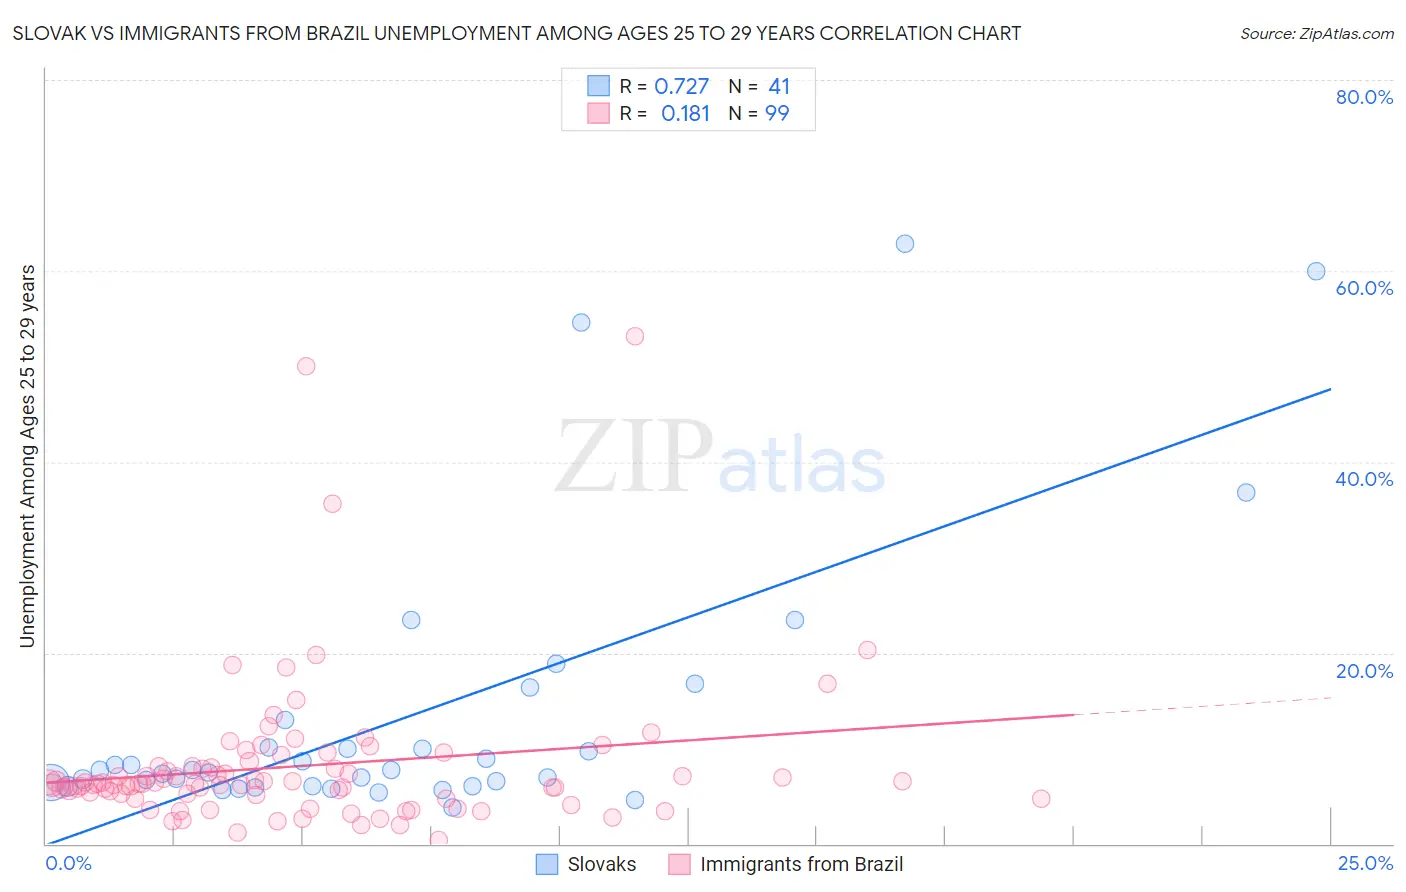 Slovak vs Immigrants from Brazil Unemployment Among Ages 25 to 29 years